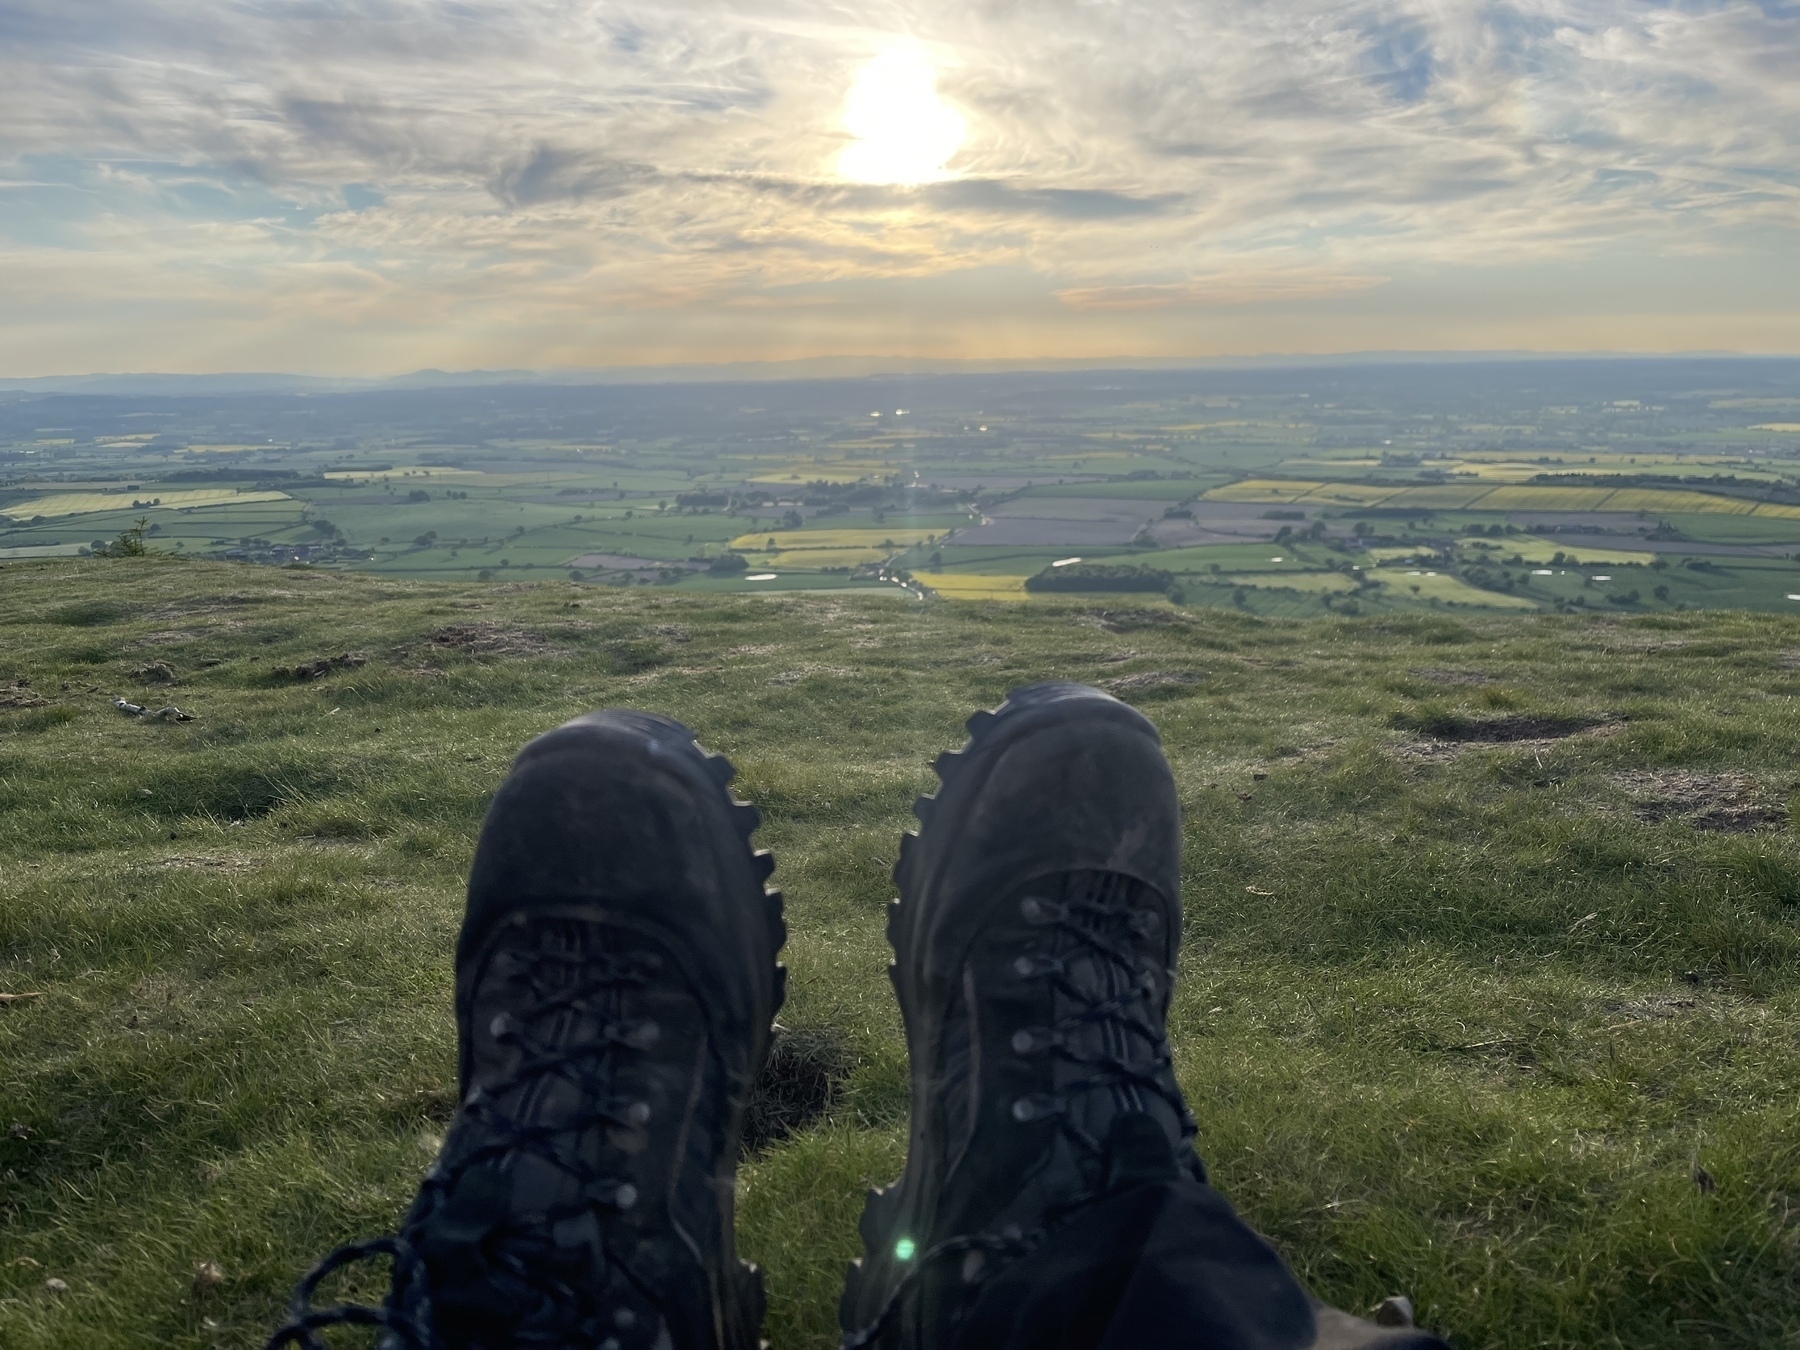 Picture taken of the photographers legs while sitting on the Wrekin, showing his walking boots in the center lower part of the photo, overlooking the patchwork fields of the Shropshire countryside with the sun showing through the clouds at sunset.